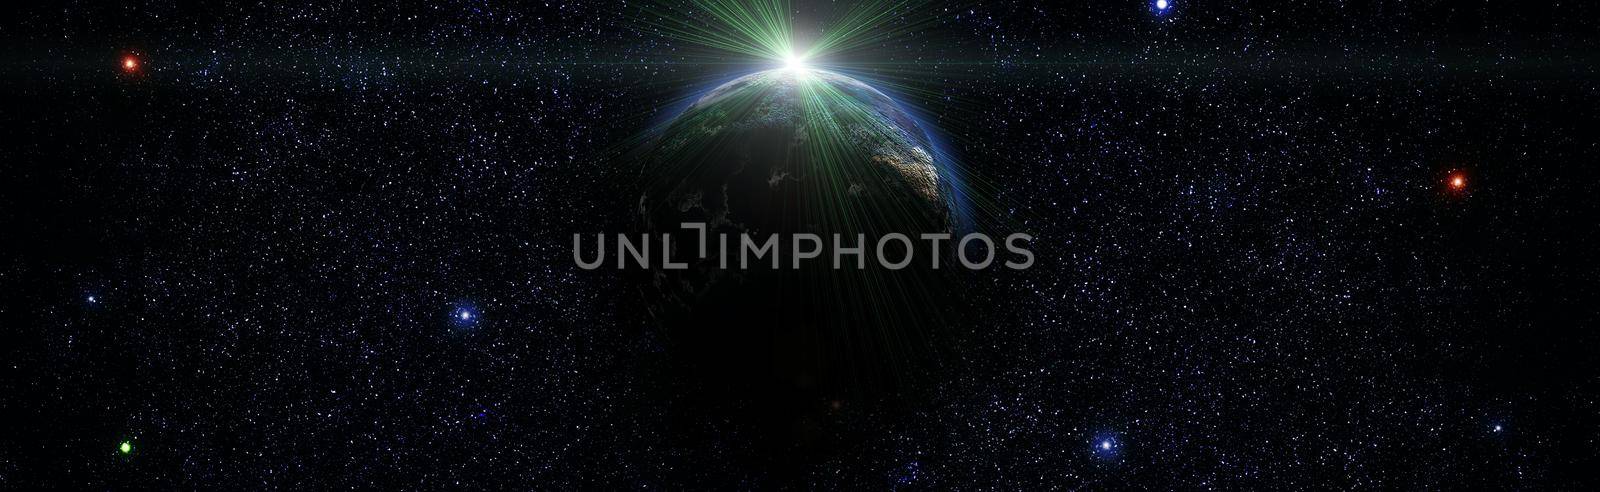 Earth and galaxies in space. Science fiction art. by Maximusnd